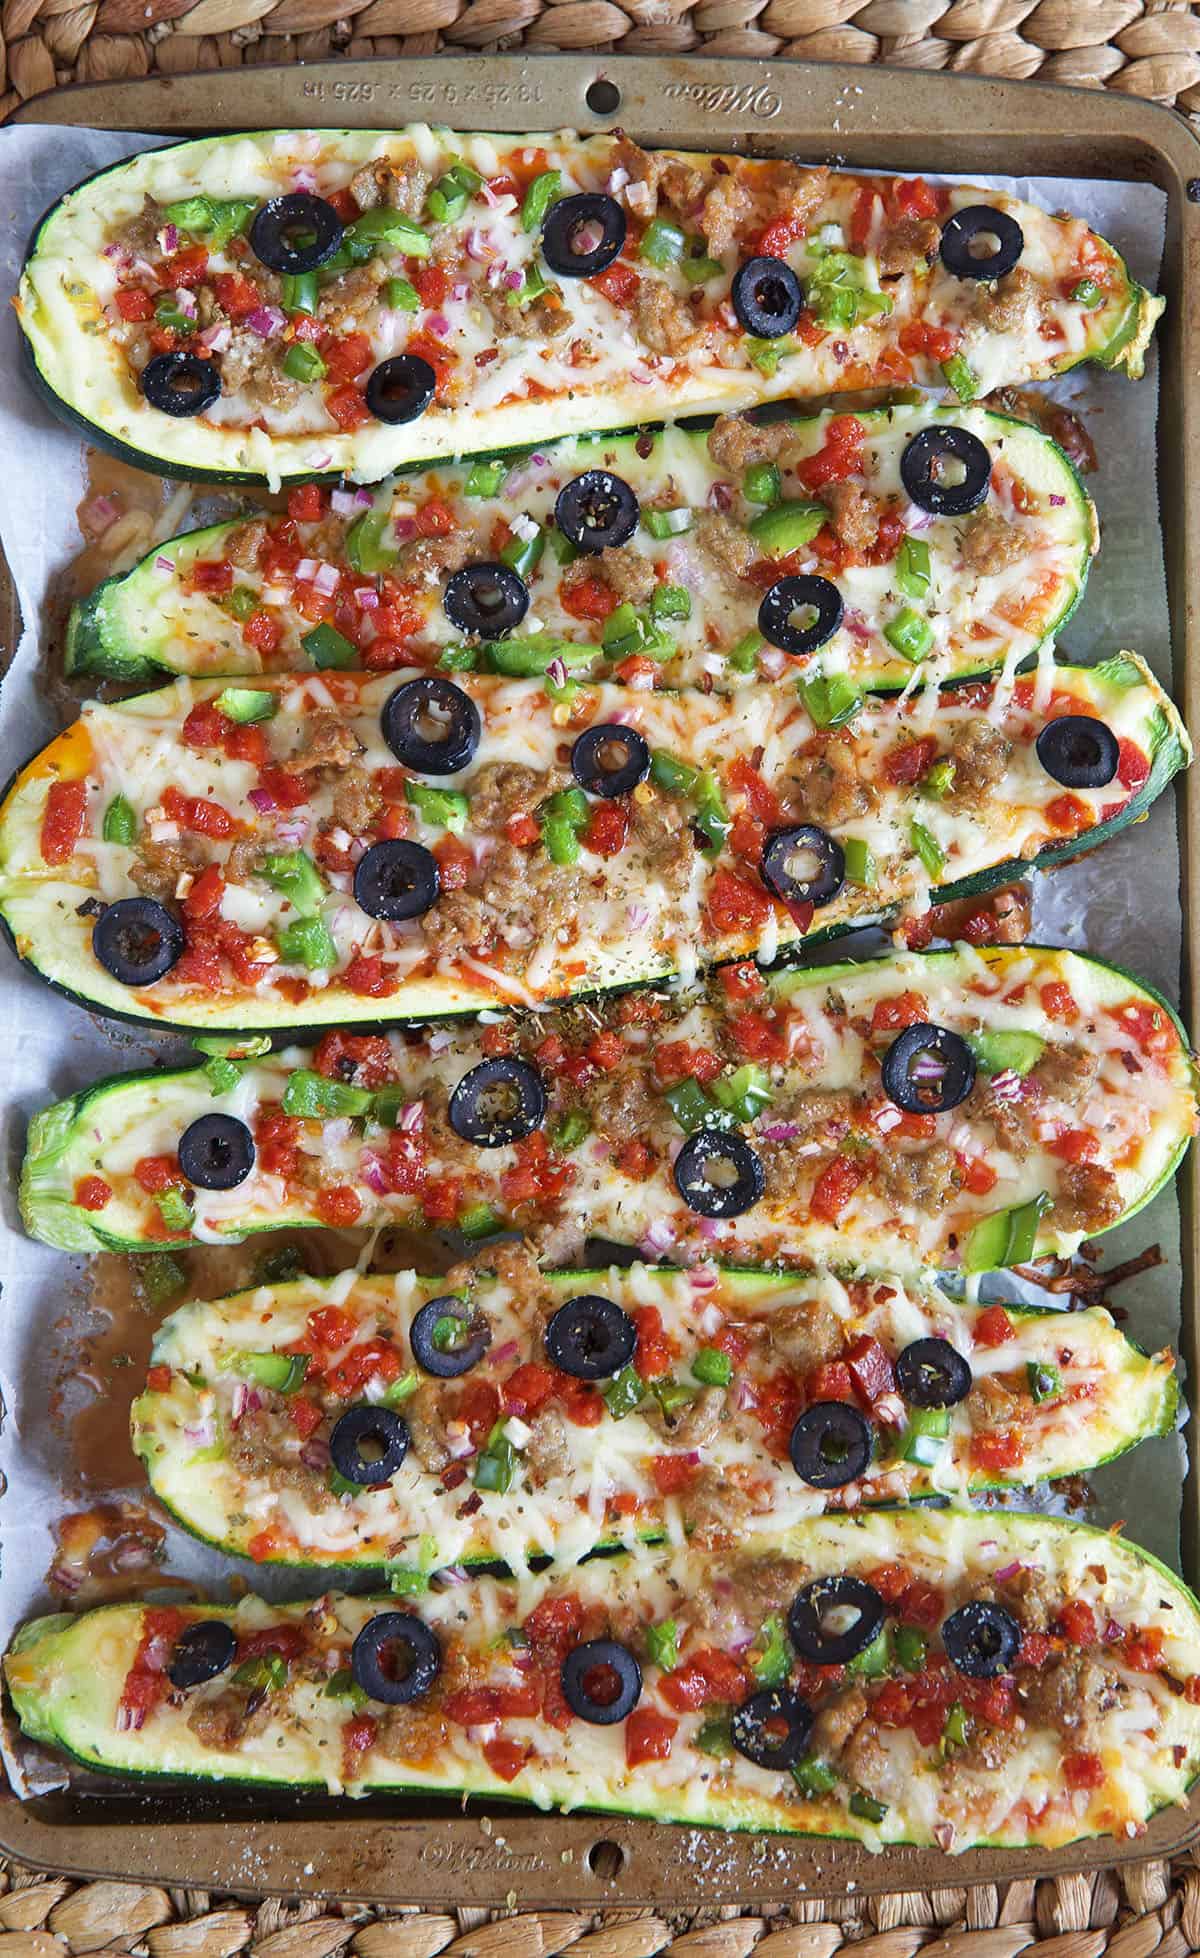 Multiple zucchini boats are placed on a baking sheet, and they're fully cooked.